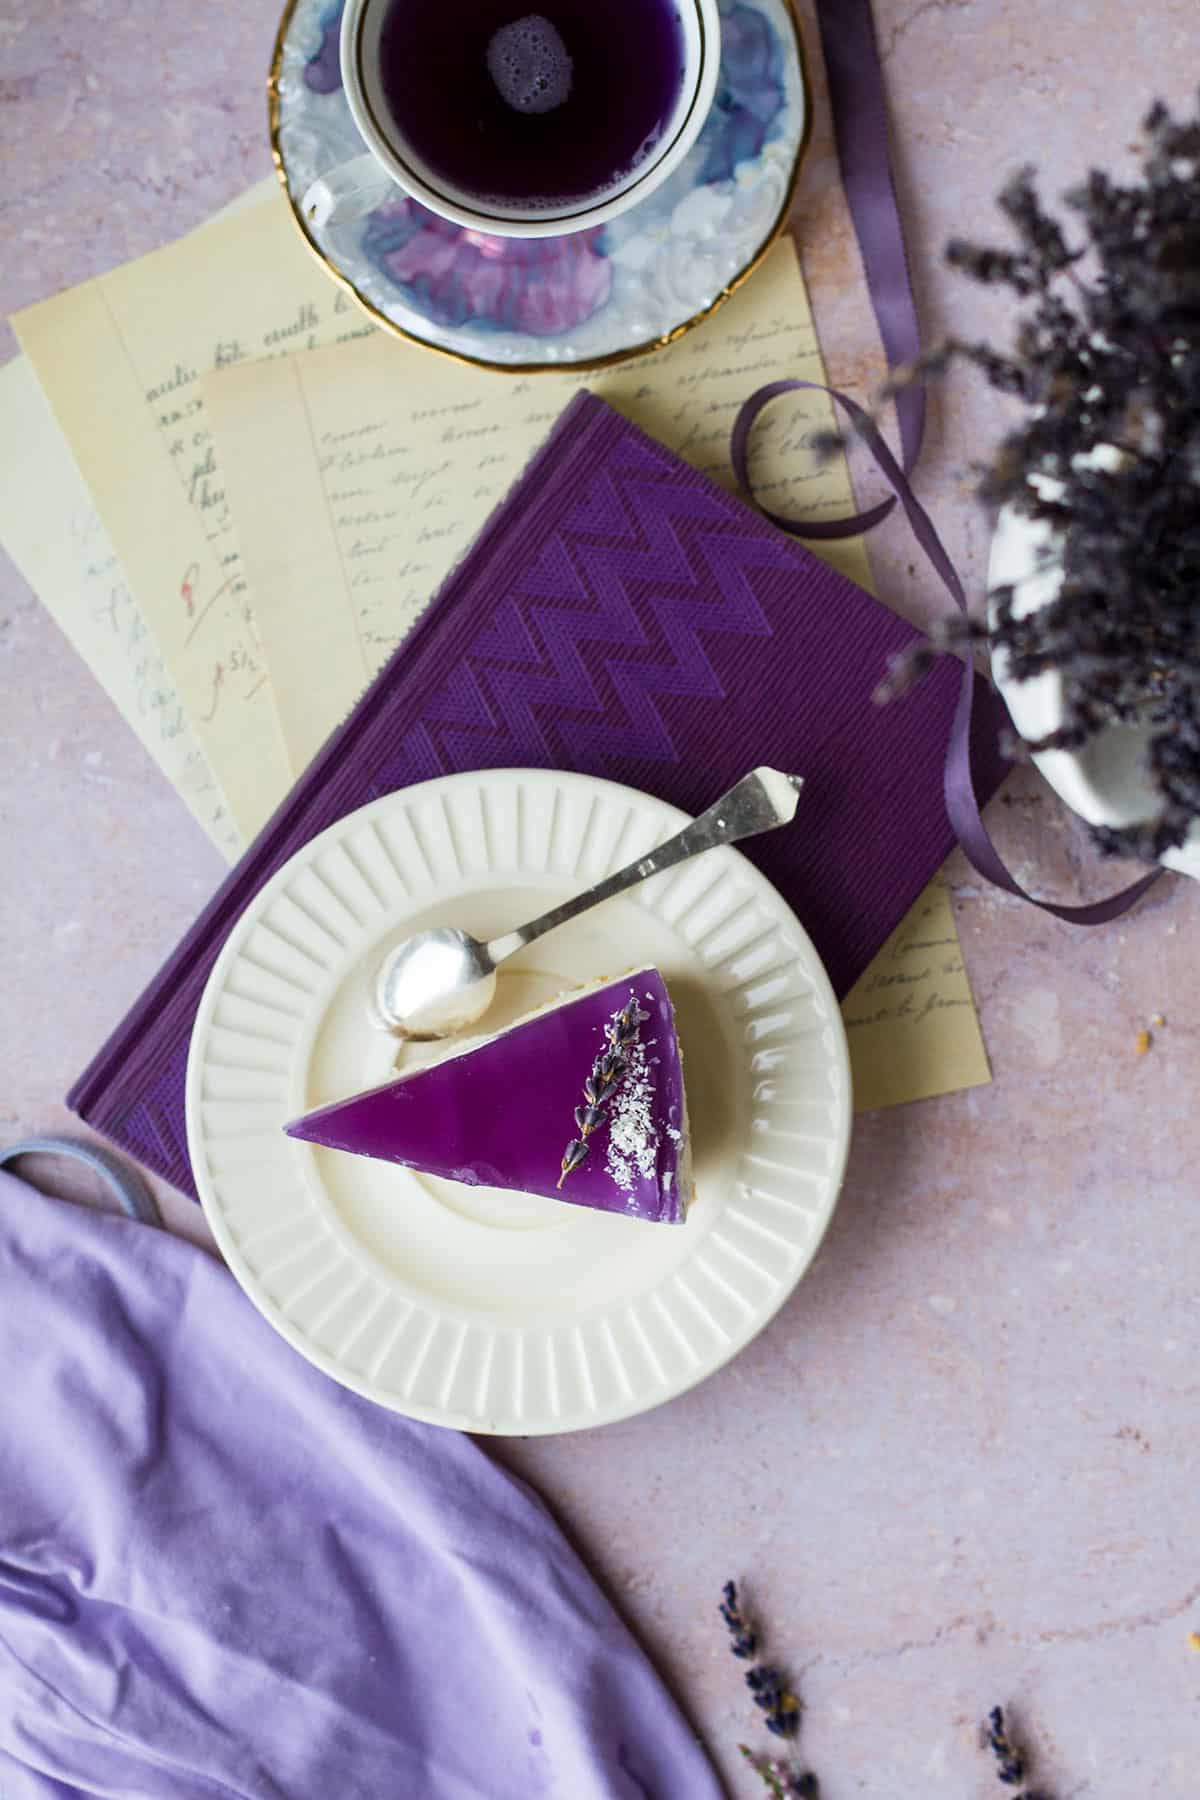 A slice of cheesecake with a puprple jelly lid on a vintage plate, purple background.